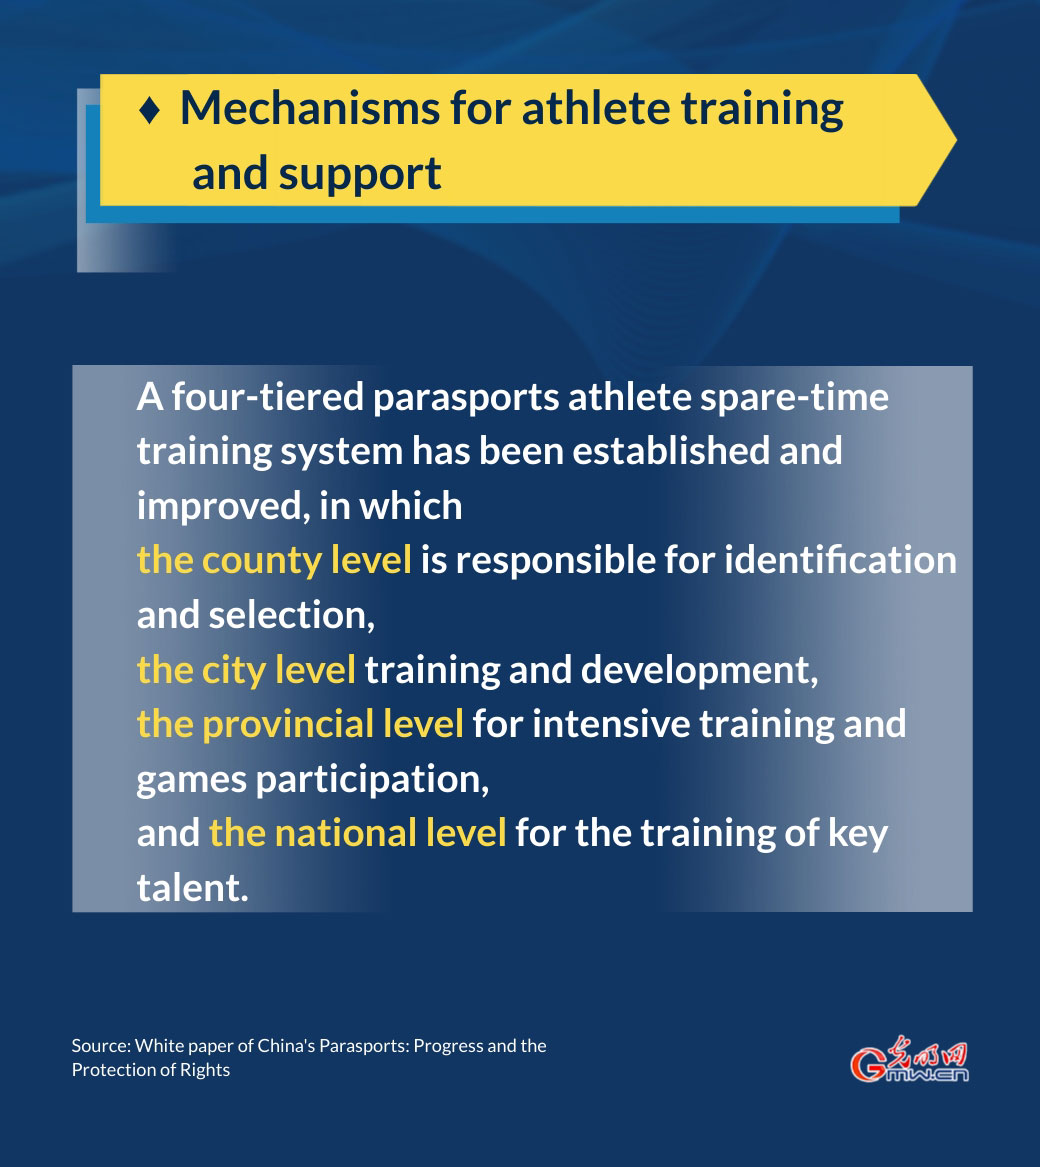 Infographic: China's performances in parasports improve steadily